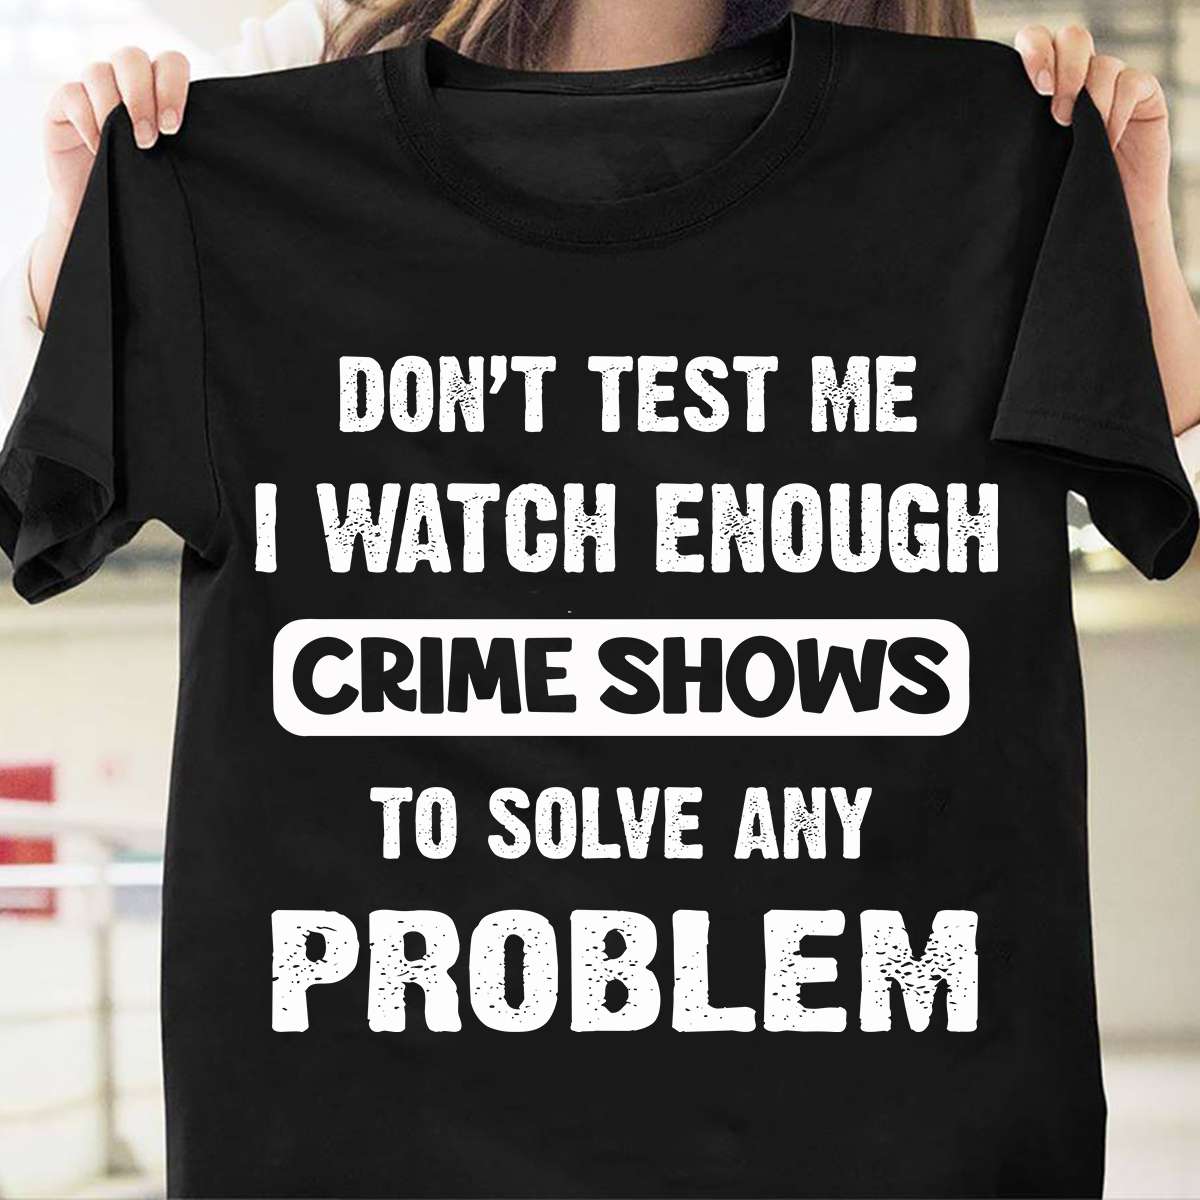 Don't test me i watch enough crime shows to solve any problem